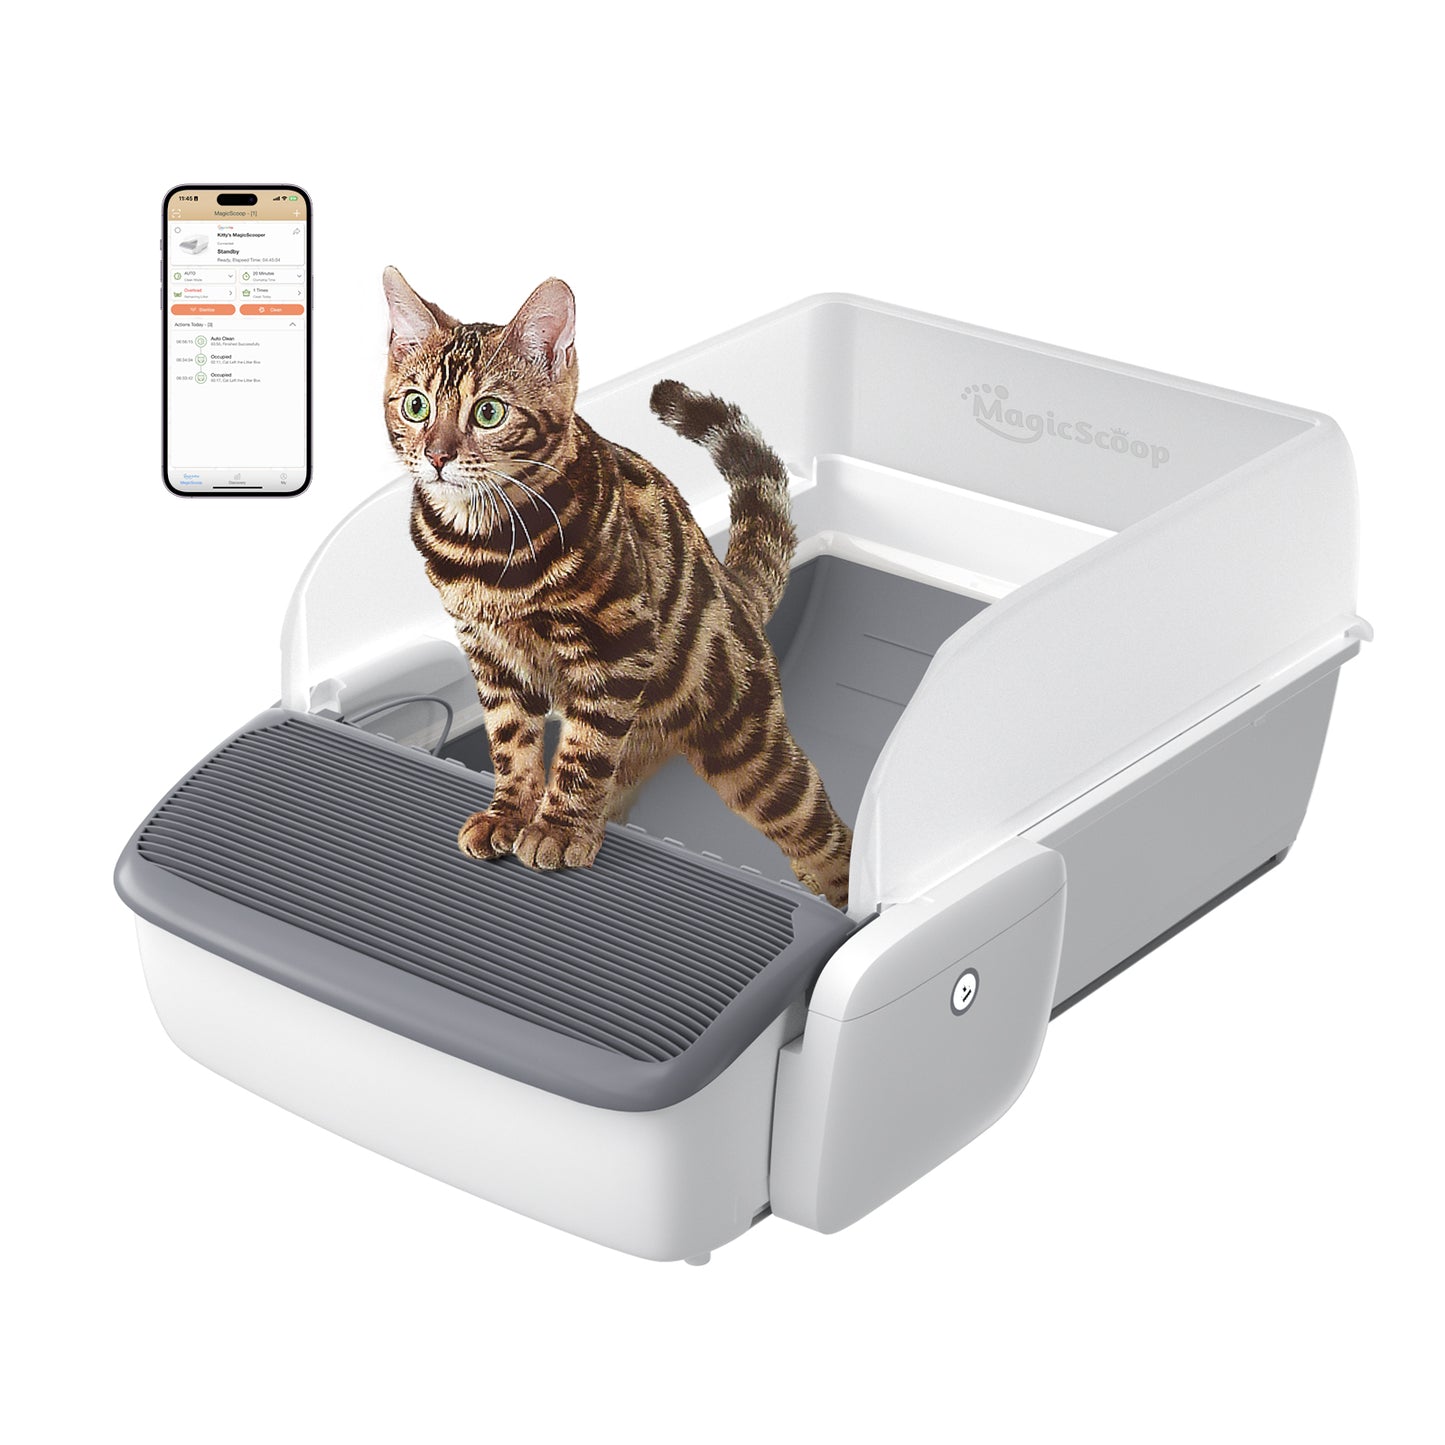 MagicScoop Open-Style Fully Automatic Litter Box Self Cleaning Scooping Litter Robot with Extra-Large Transh Bin